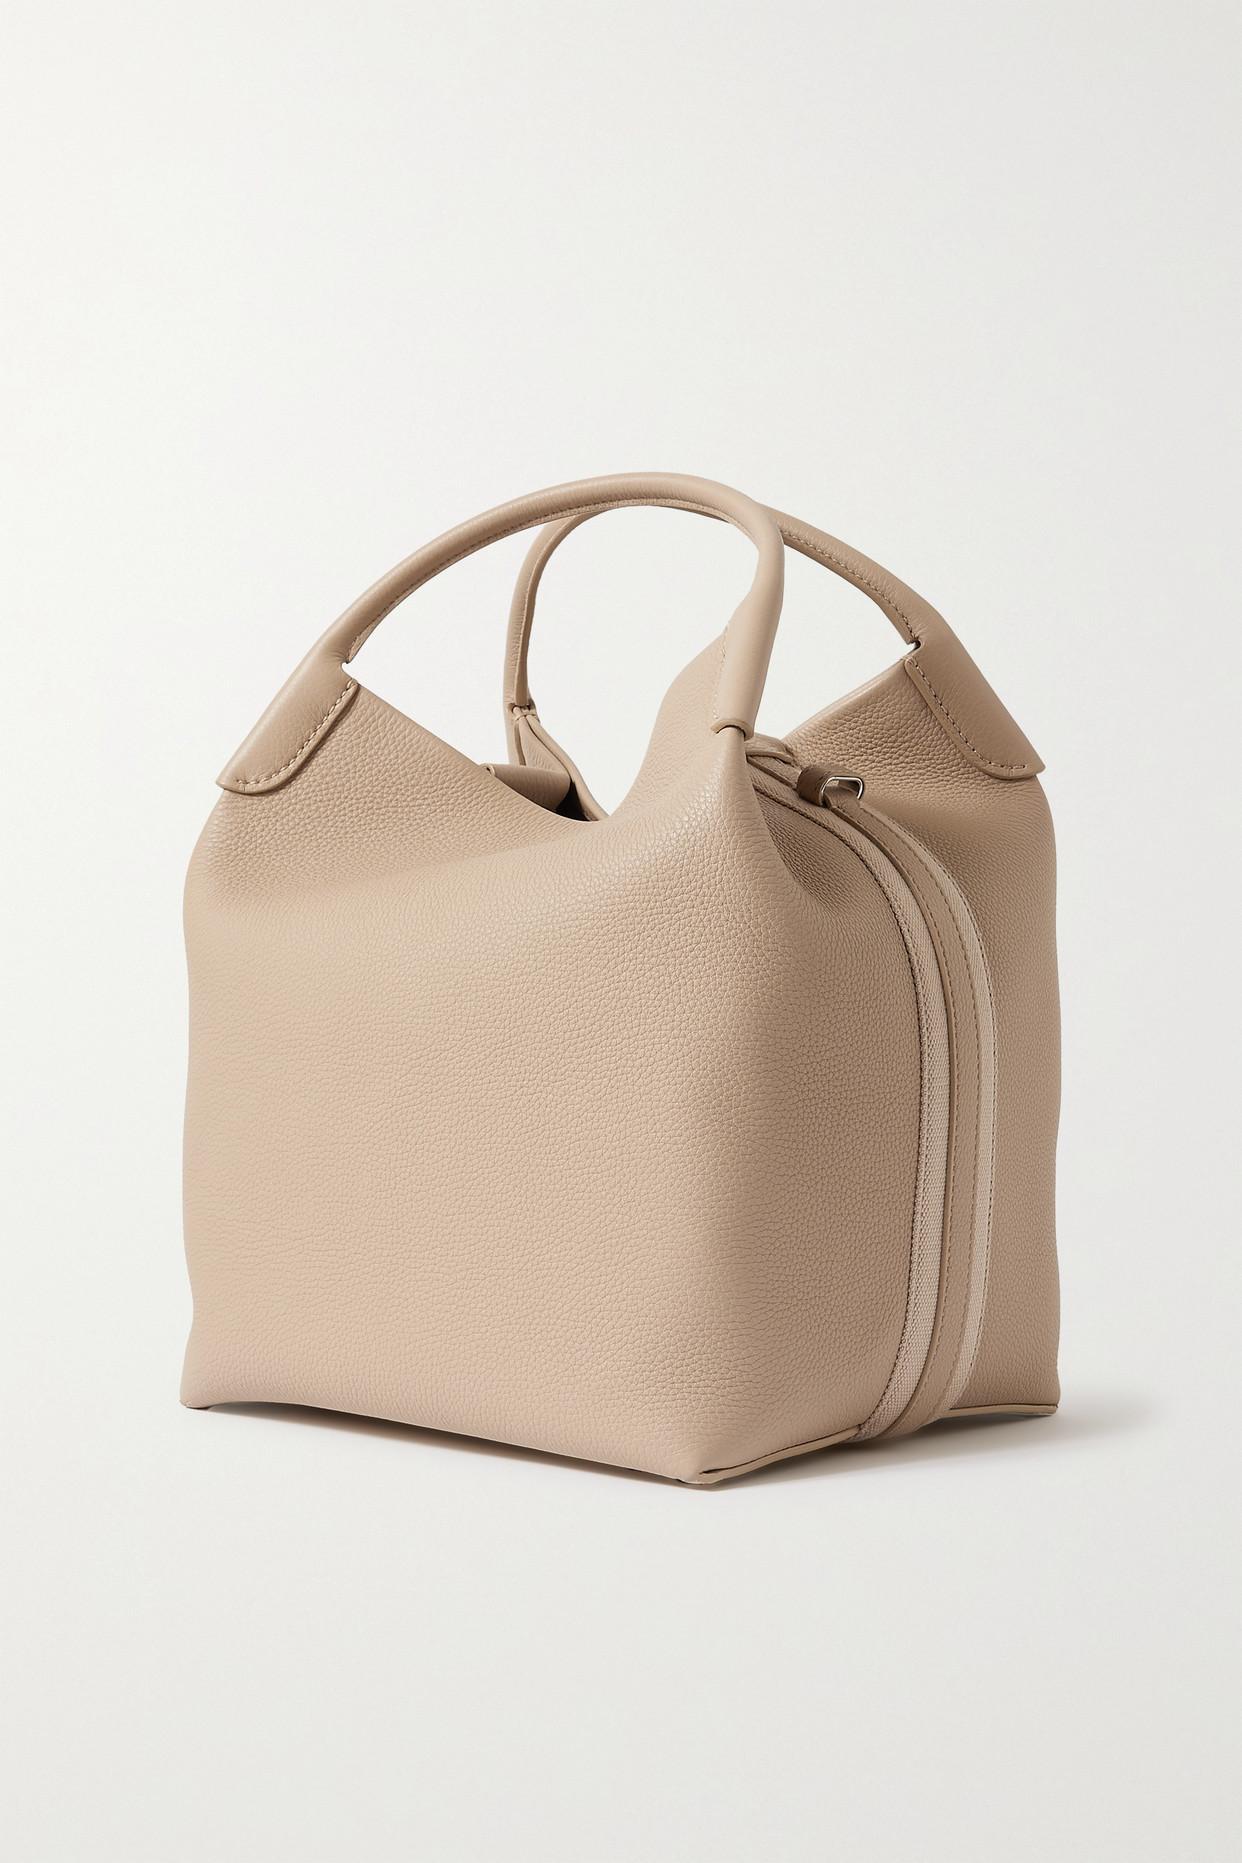 LORO PIANA Carry Everything small leather-trimmed suede tote